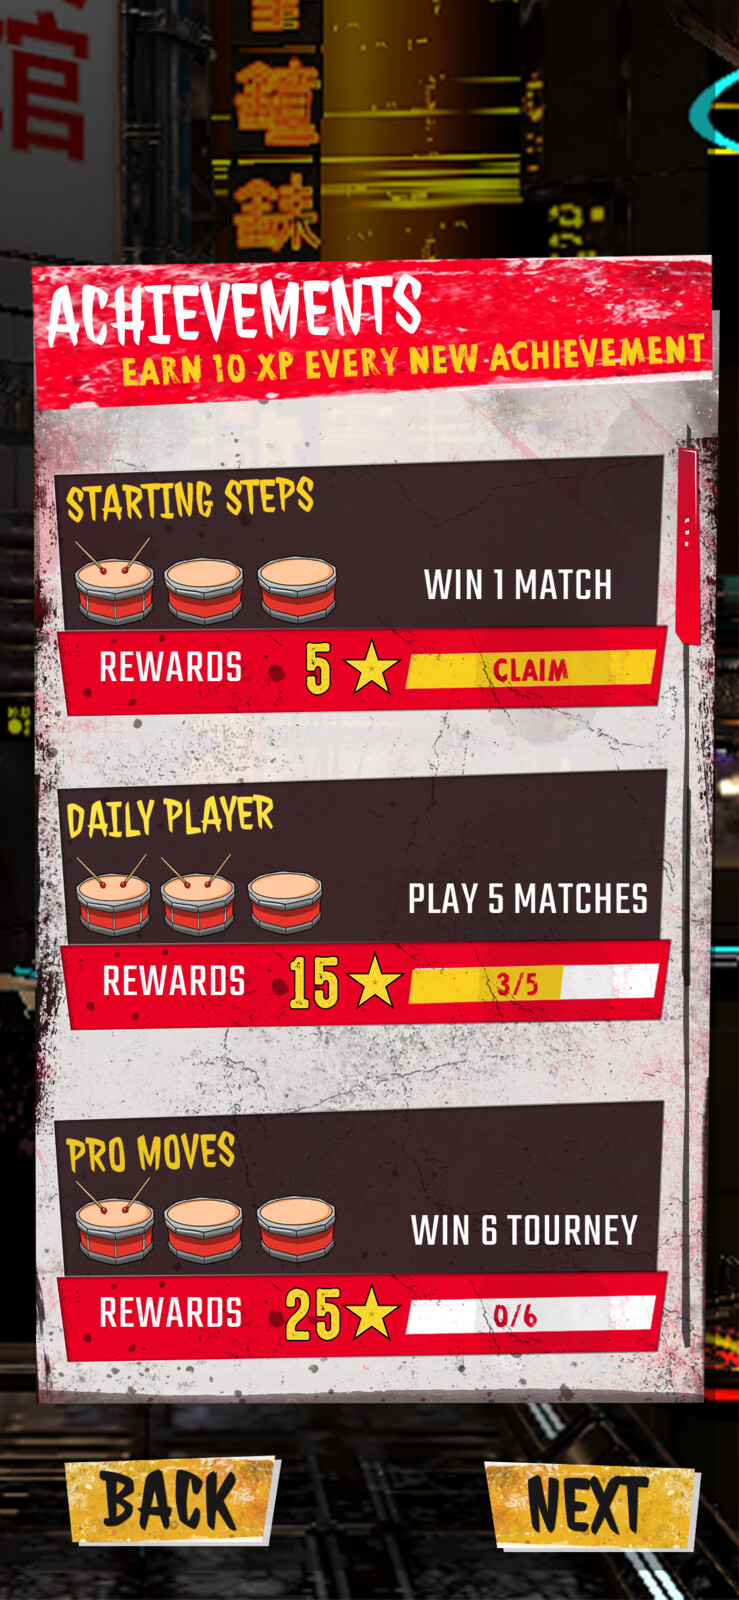 Achievements screen wherein drums were used instead of stars like regular games to blend the UI with the theme of the game.  